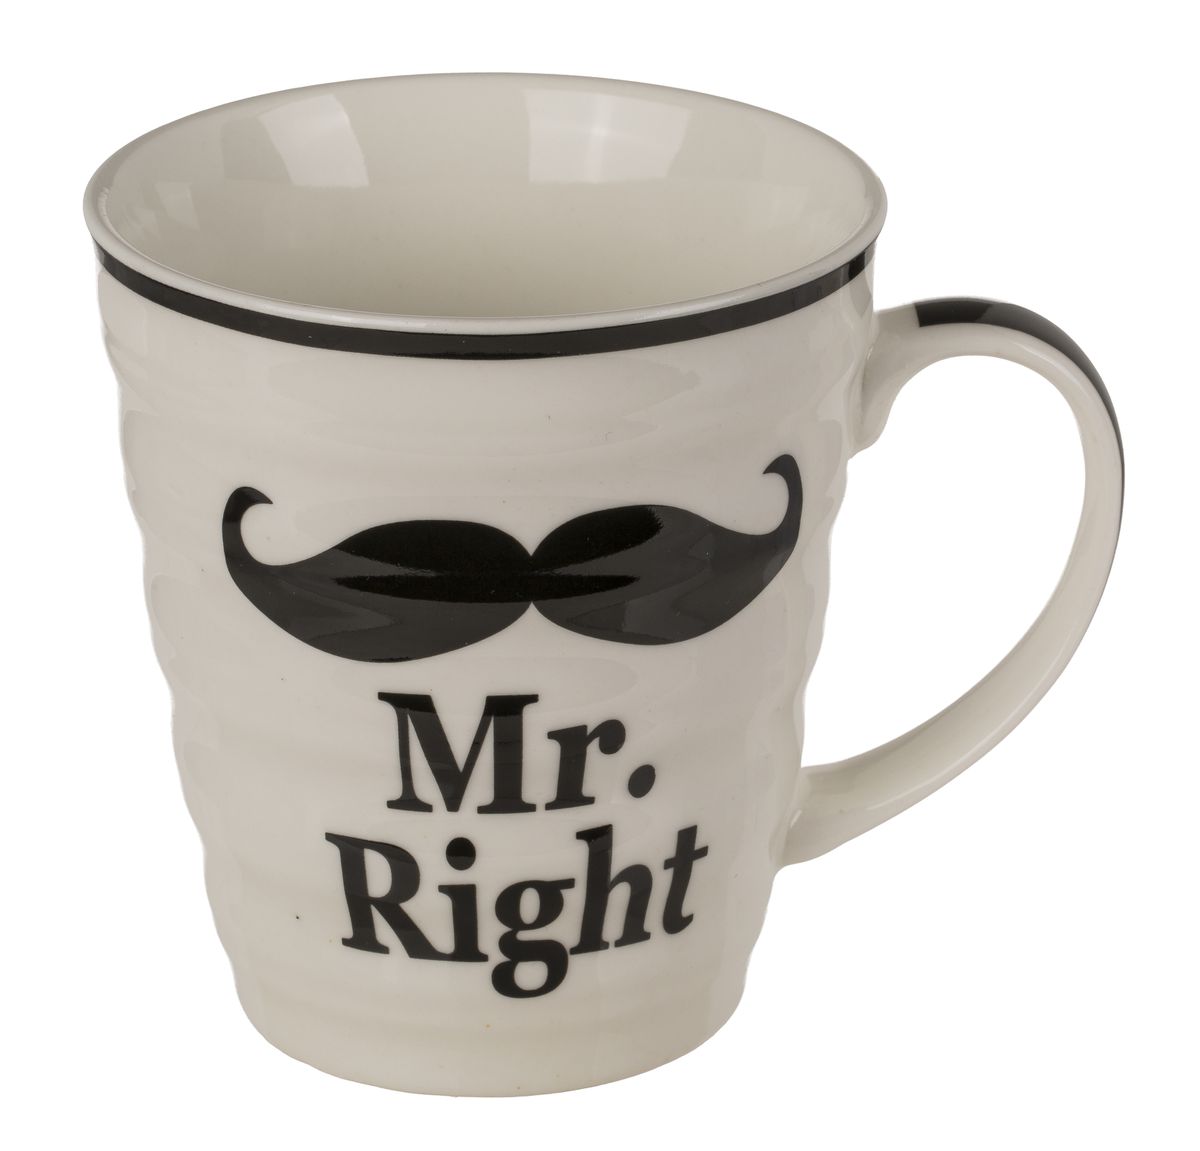 Mr Right & Mrs Always Right Coffee Mugs